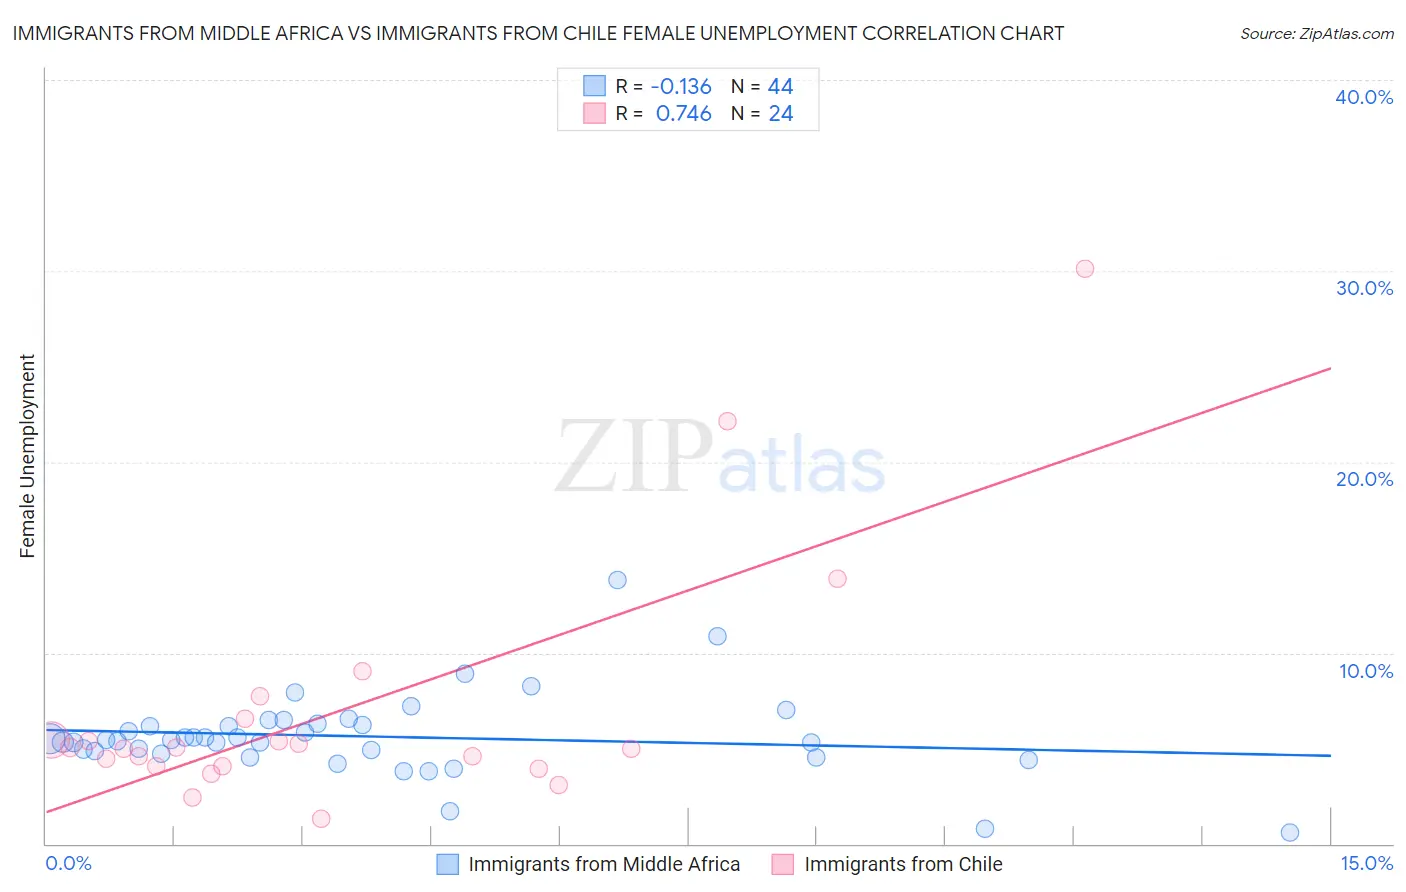 Immigrants from Middle Africa vs Immigrants from Chile Female Unemployment